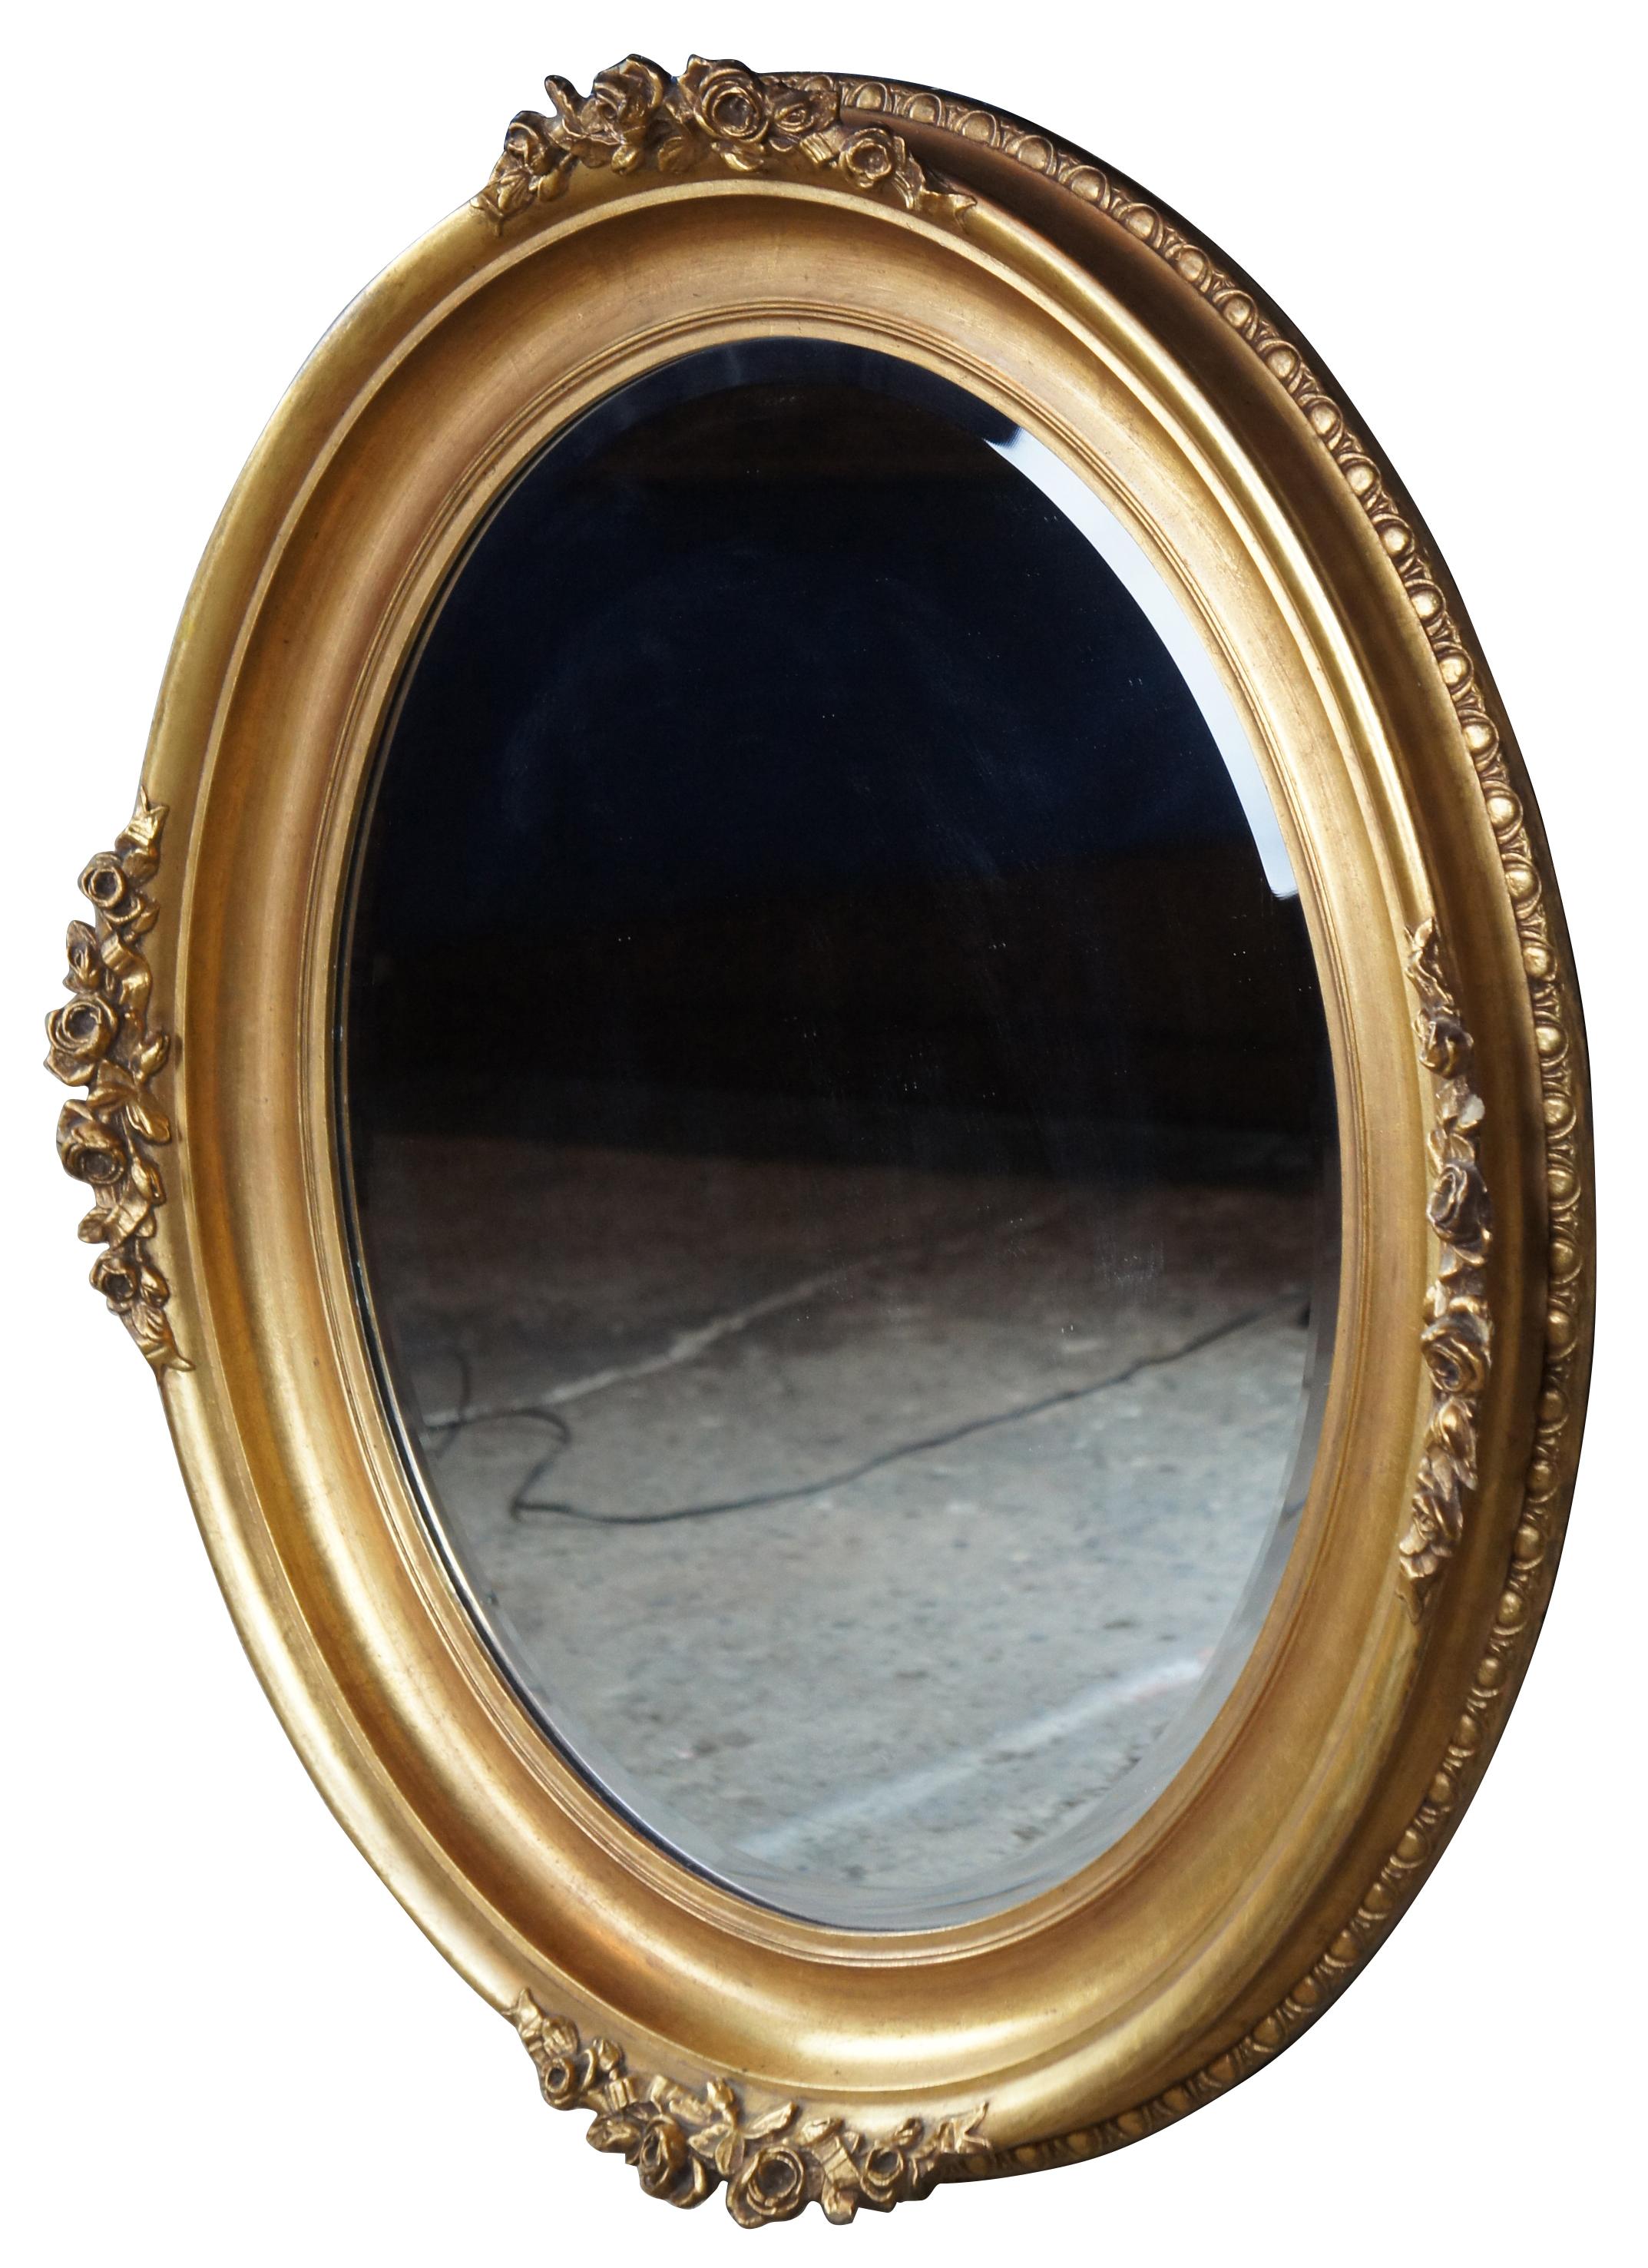 A mid-20th century Victorian inspired mirror. The oval frame features gadrooning trim along the back edge and floral roses and ribbons accents carved along the front edge in gesso. Measures: 35